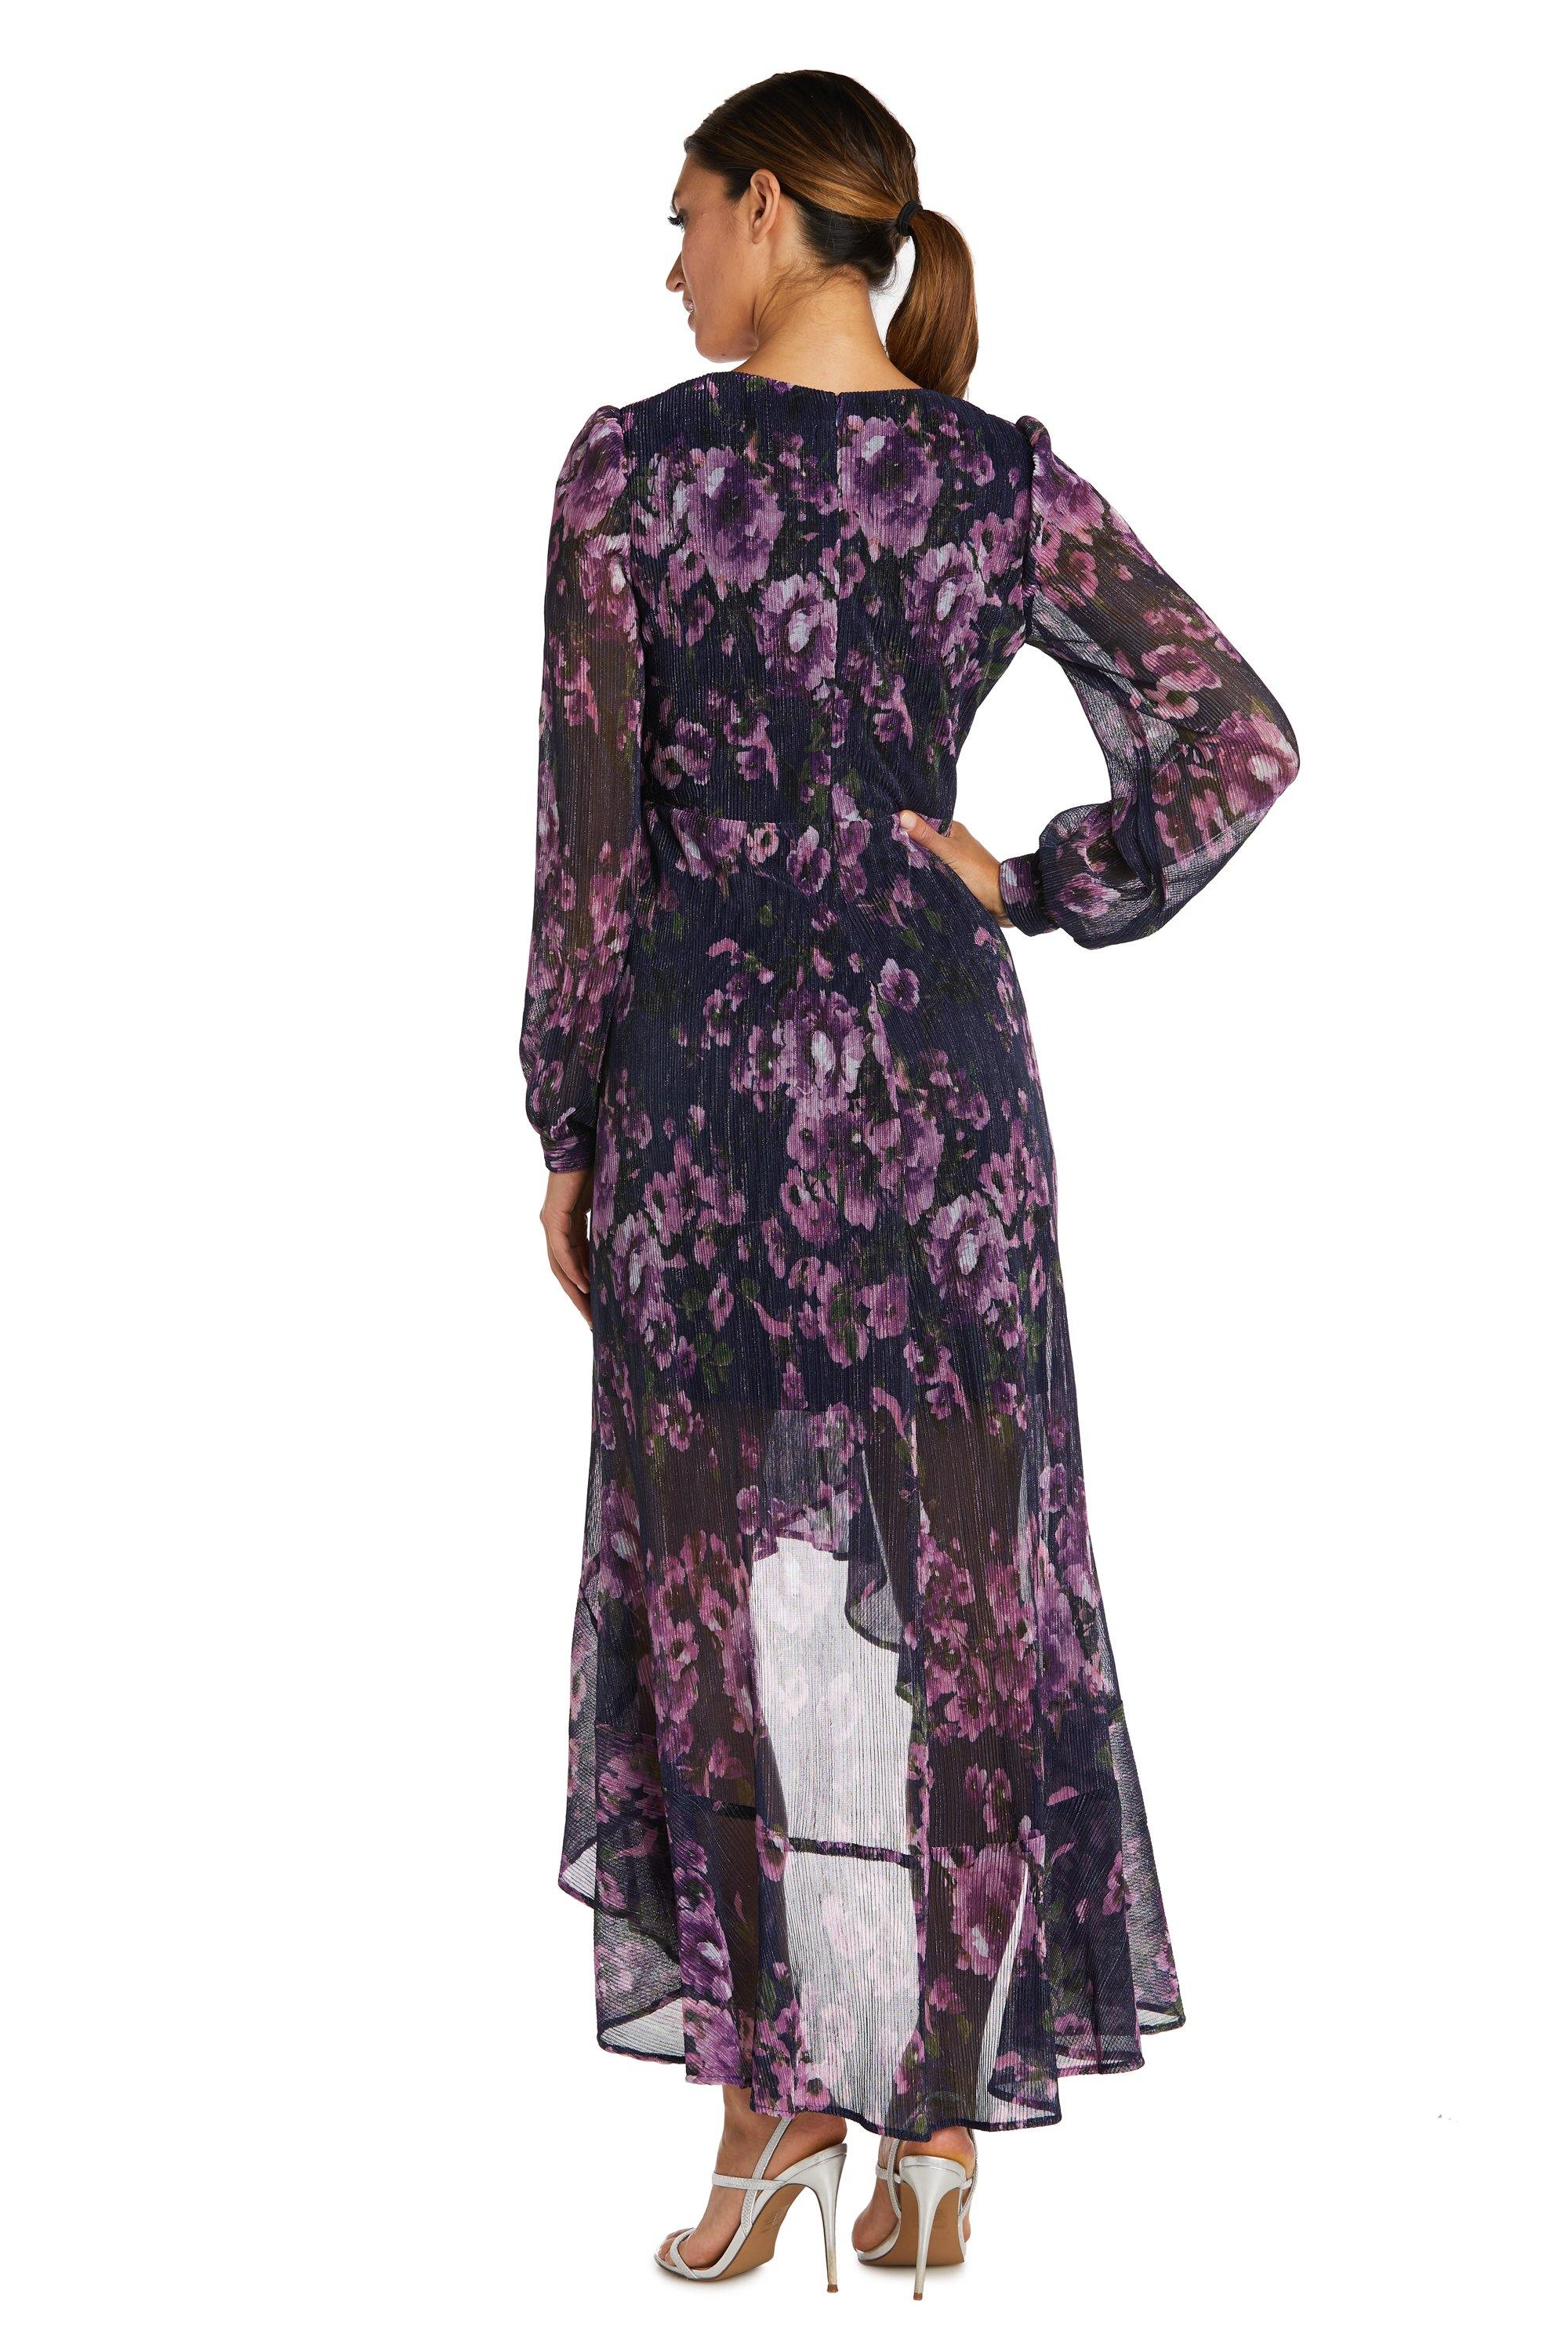 Nightway High Low Long Sleeve Floral Dress 22051 - The Dress Outlet